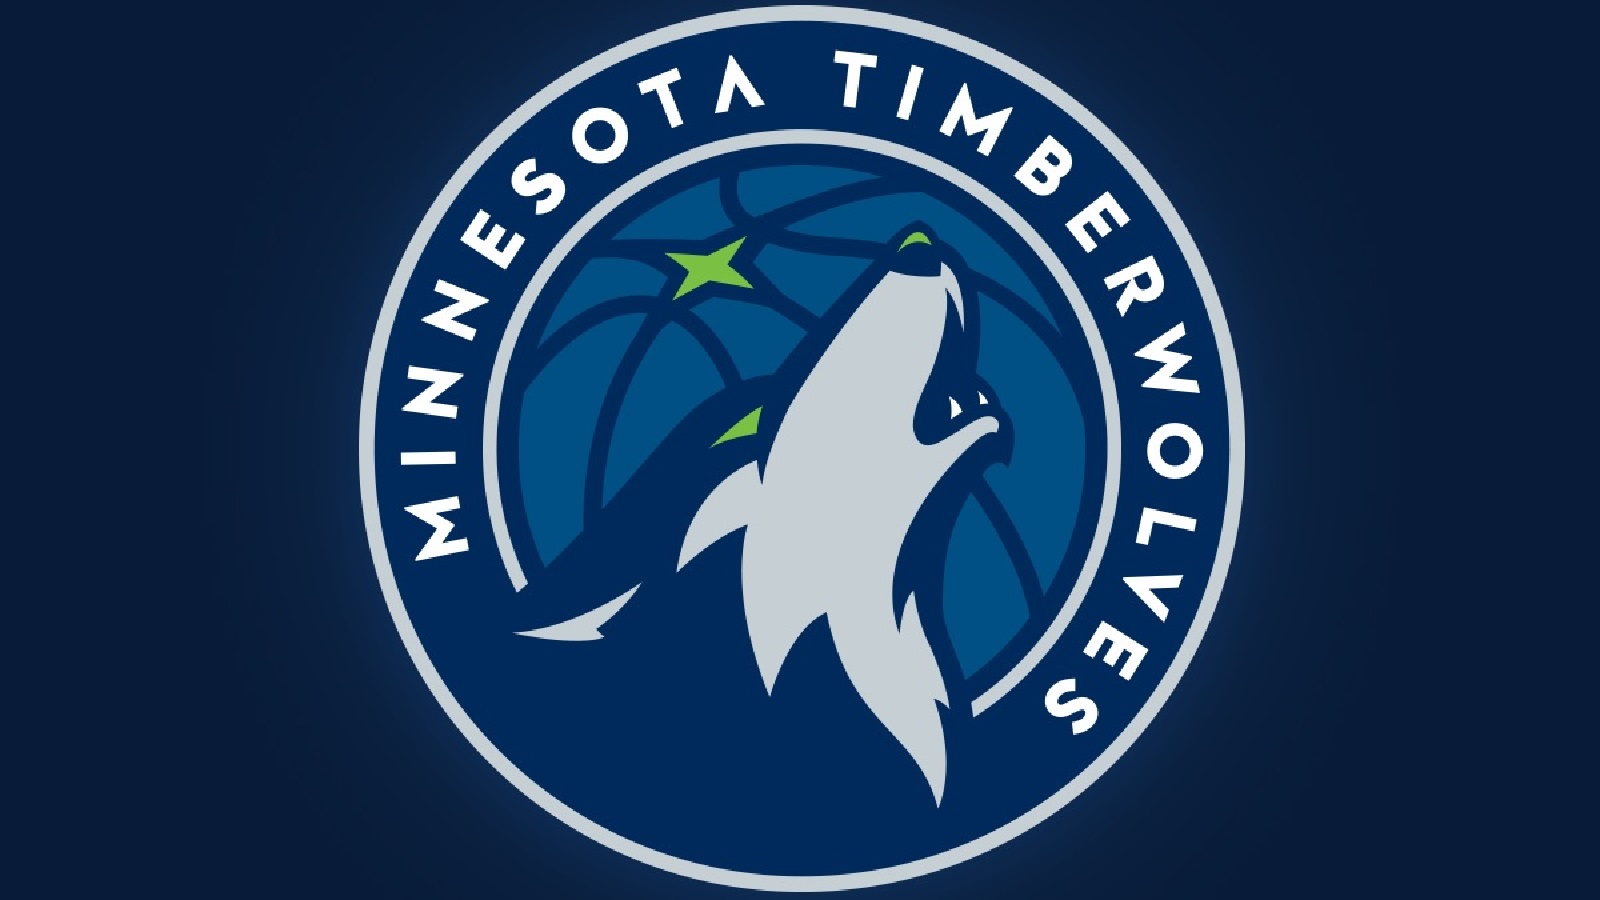 Glen Taylor says Timberwolves are no longer for sale in dramatic reversal